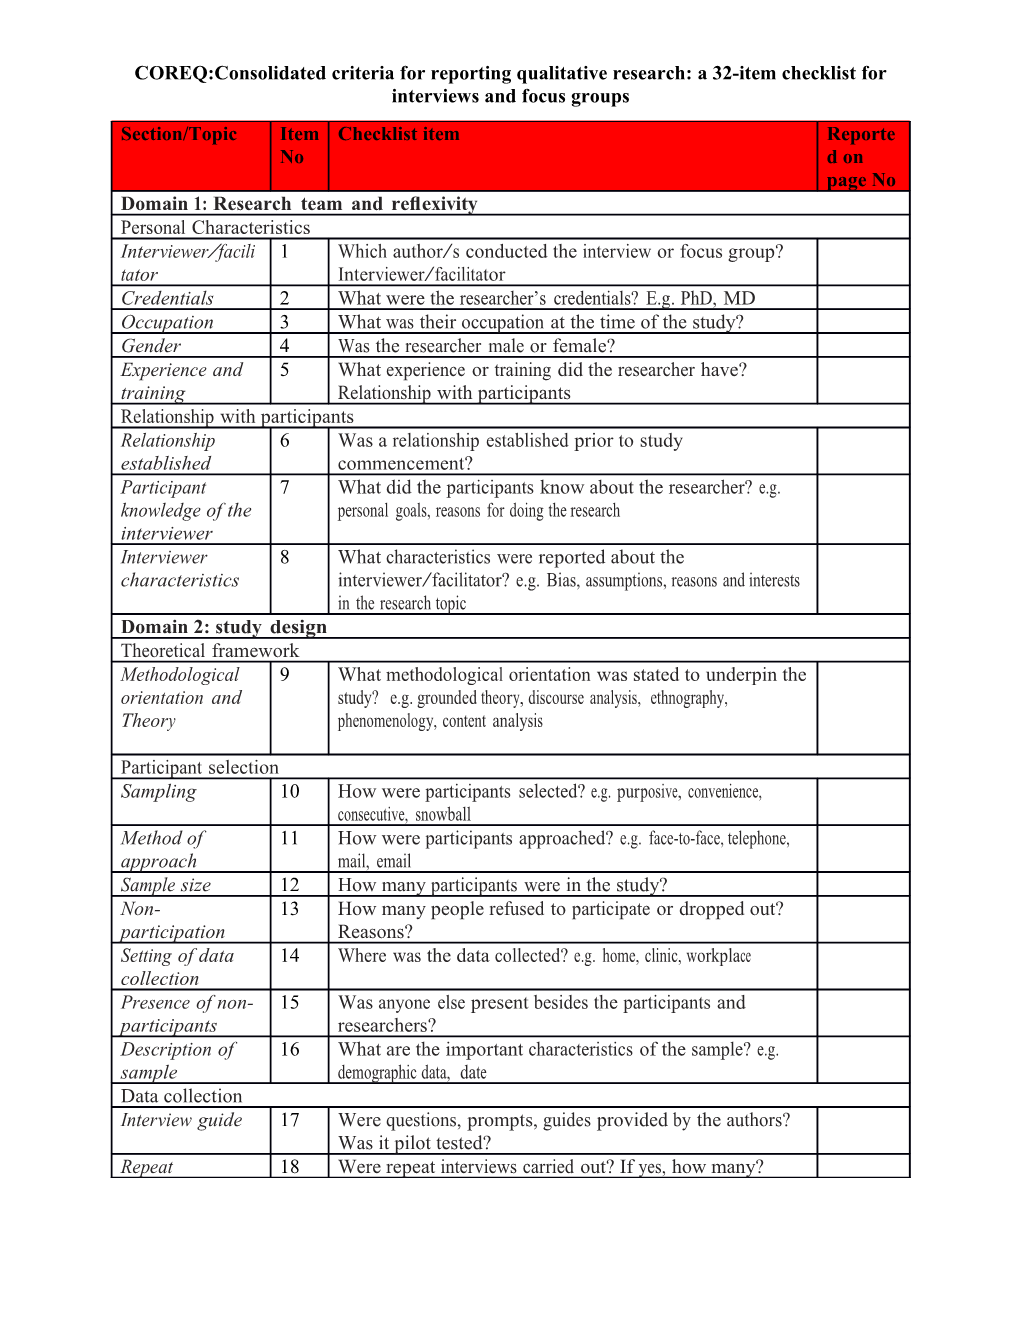 COREQ:Consolidated Criteria for Reporting Qualitative Research: a 32-Item Checklist For